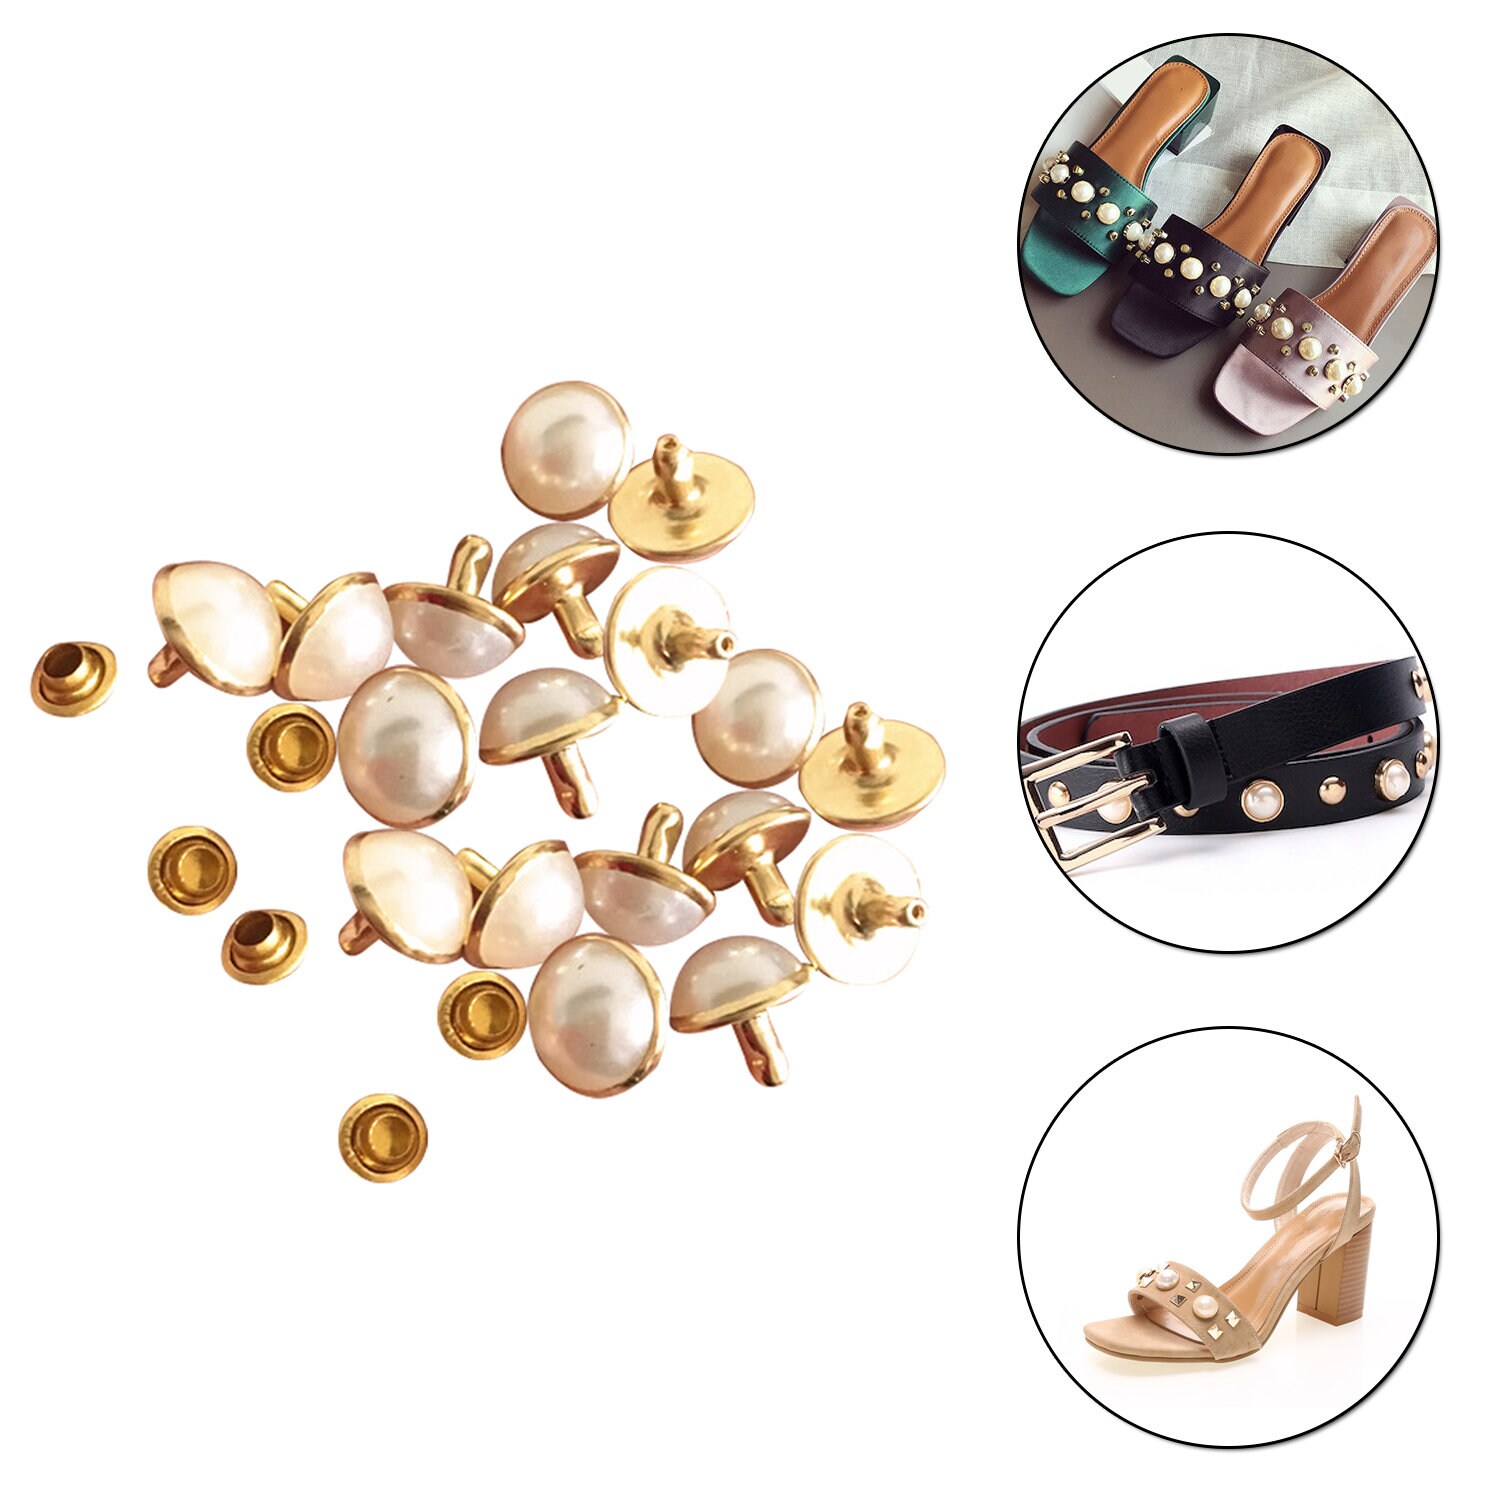 500 Sets 6MM Mixed Color Imitation Pearl Rivet Studs Kit for Clothes Rivets with Tool for Leather Craft Shoes Belts Bags Hats Skirts Beads Accessories DIY with 2 Heights of Shank 